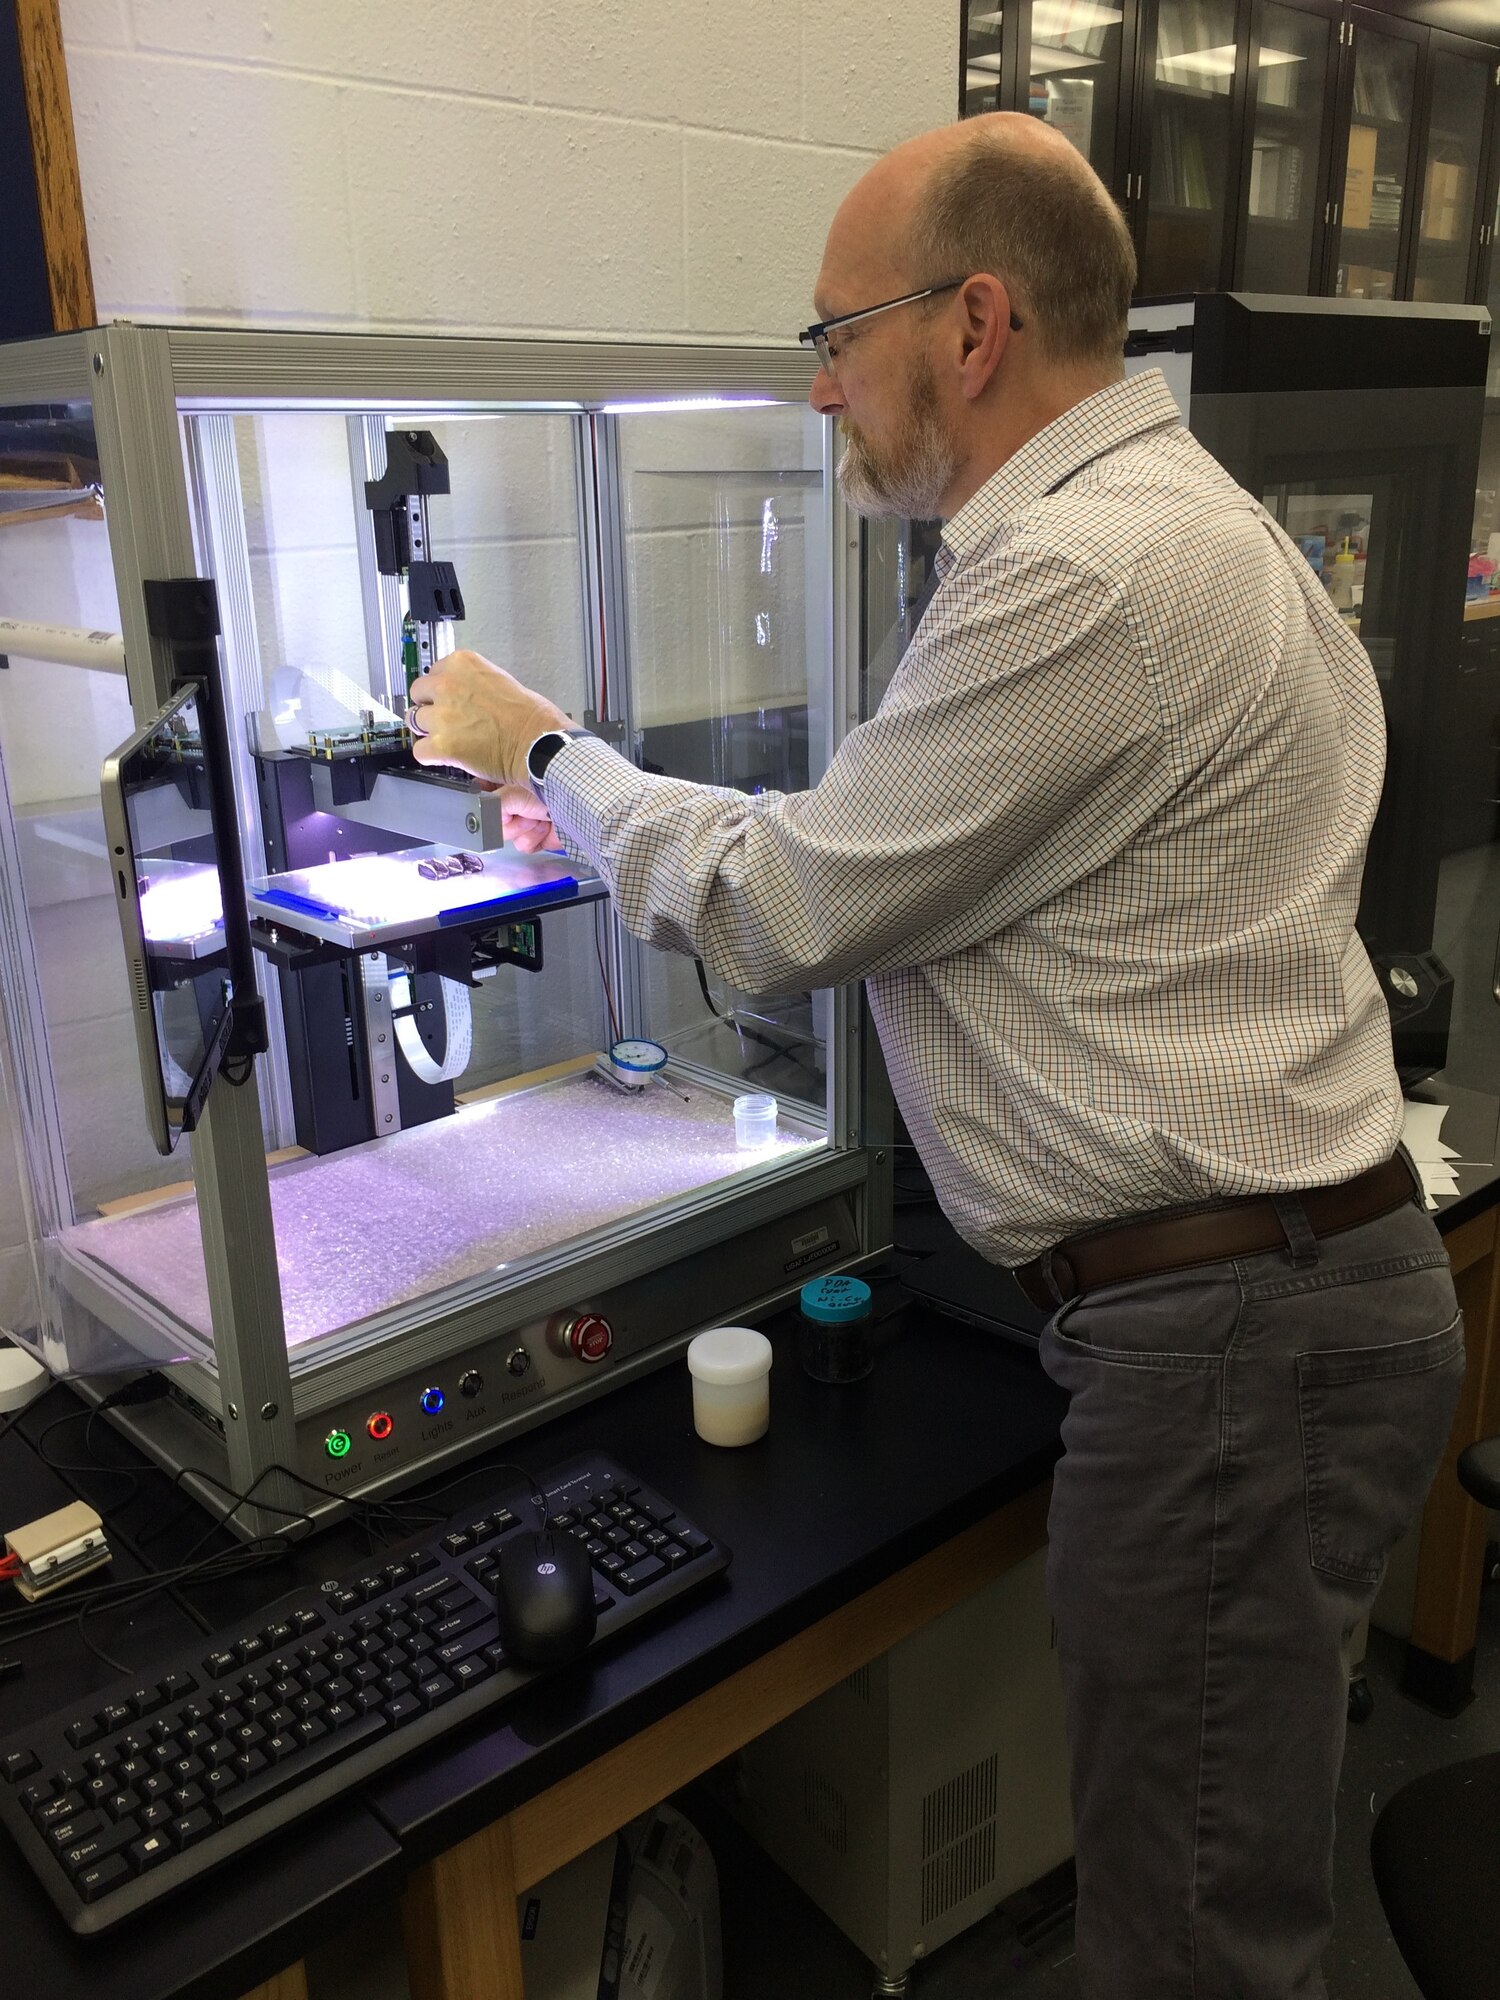 Dr. Hilmar Koerner of the Air Force Research Laboratory, was elected to the 2019 Class of the American Chemical Society of Fellows. He uses a 3D printer to print epoxy carbon fiber reinforced inks.